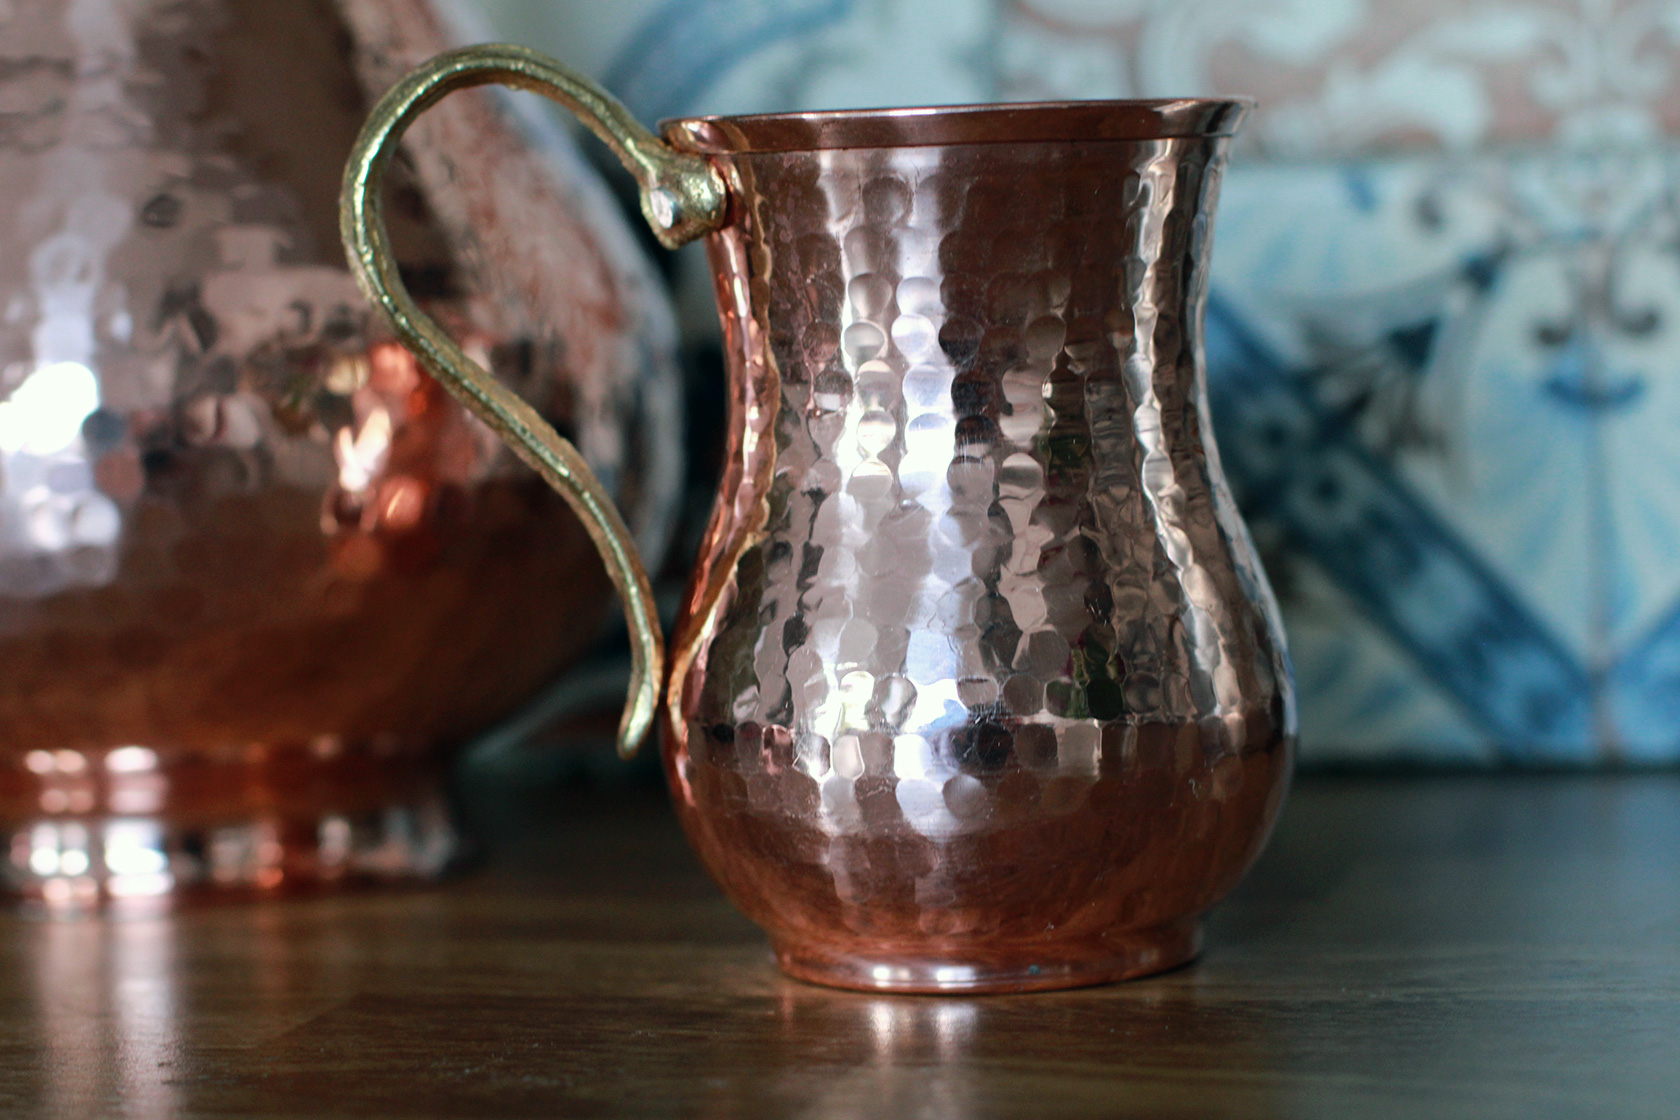 Hammered Copper Pitcher Set with Tumblers